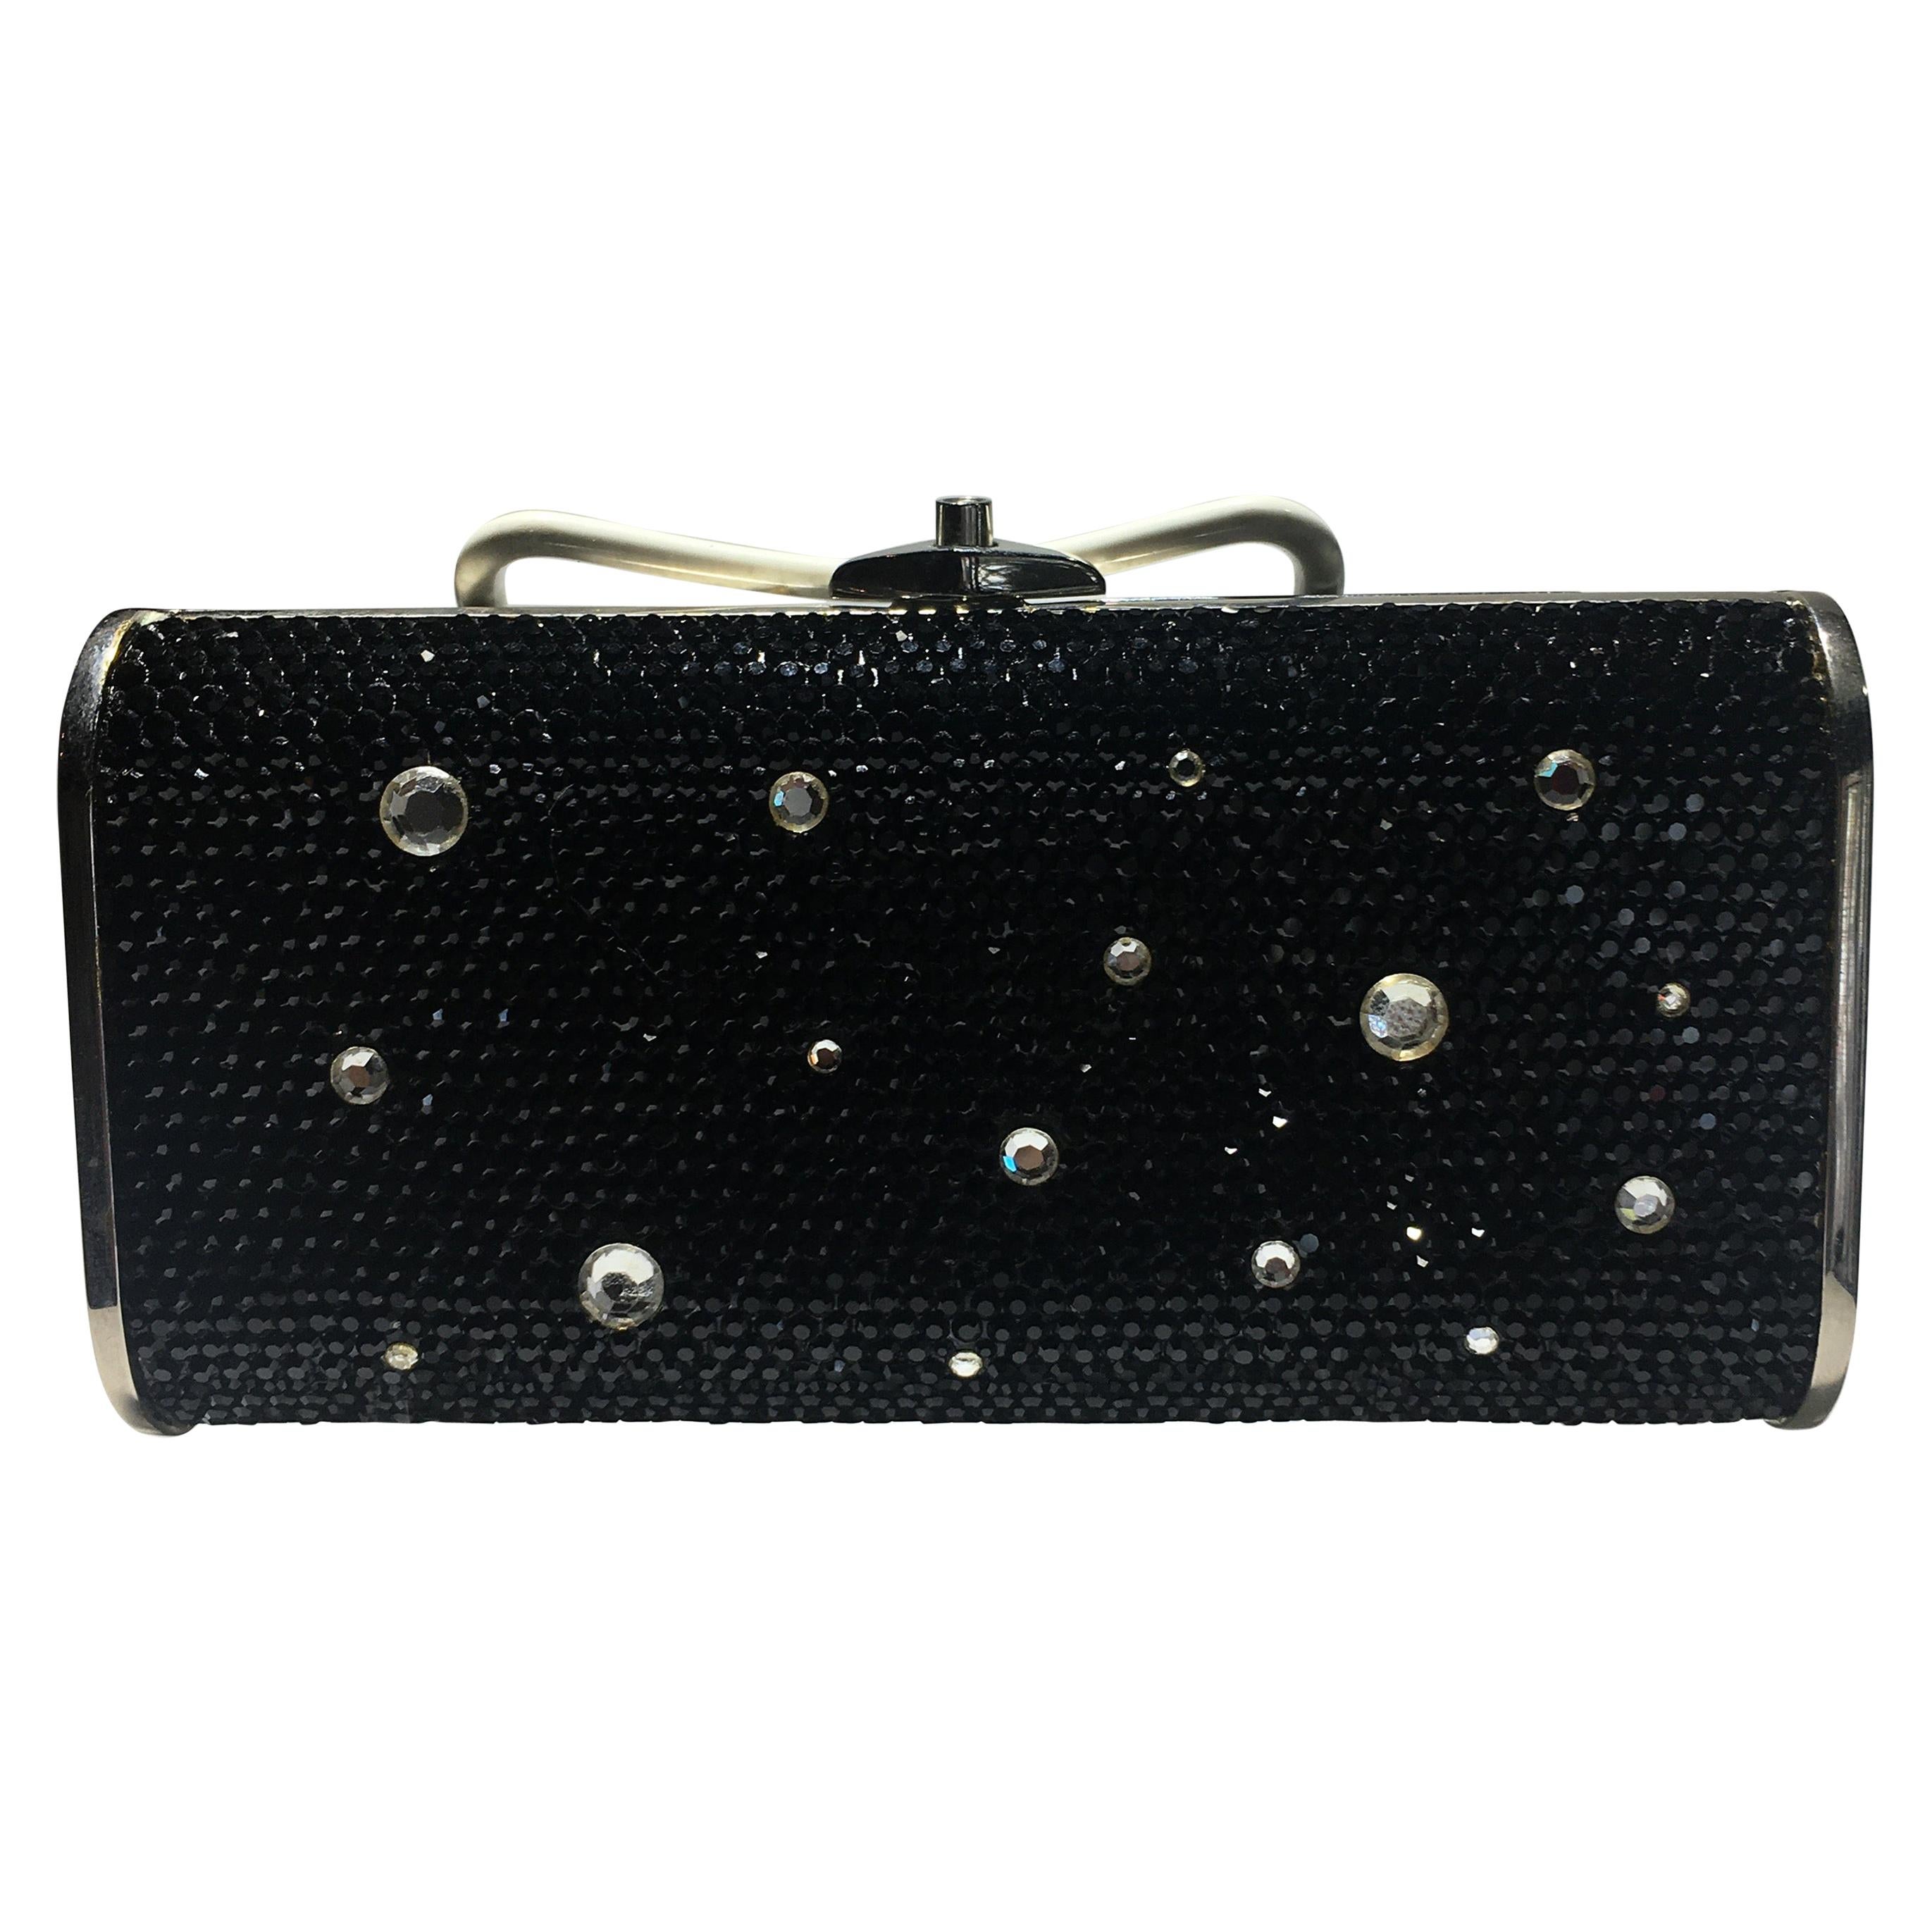 Judith Leiber Jeweled Clutch, Black And Clear Crrystals With Silver Strap. For Sale